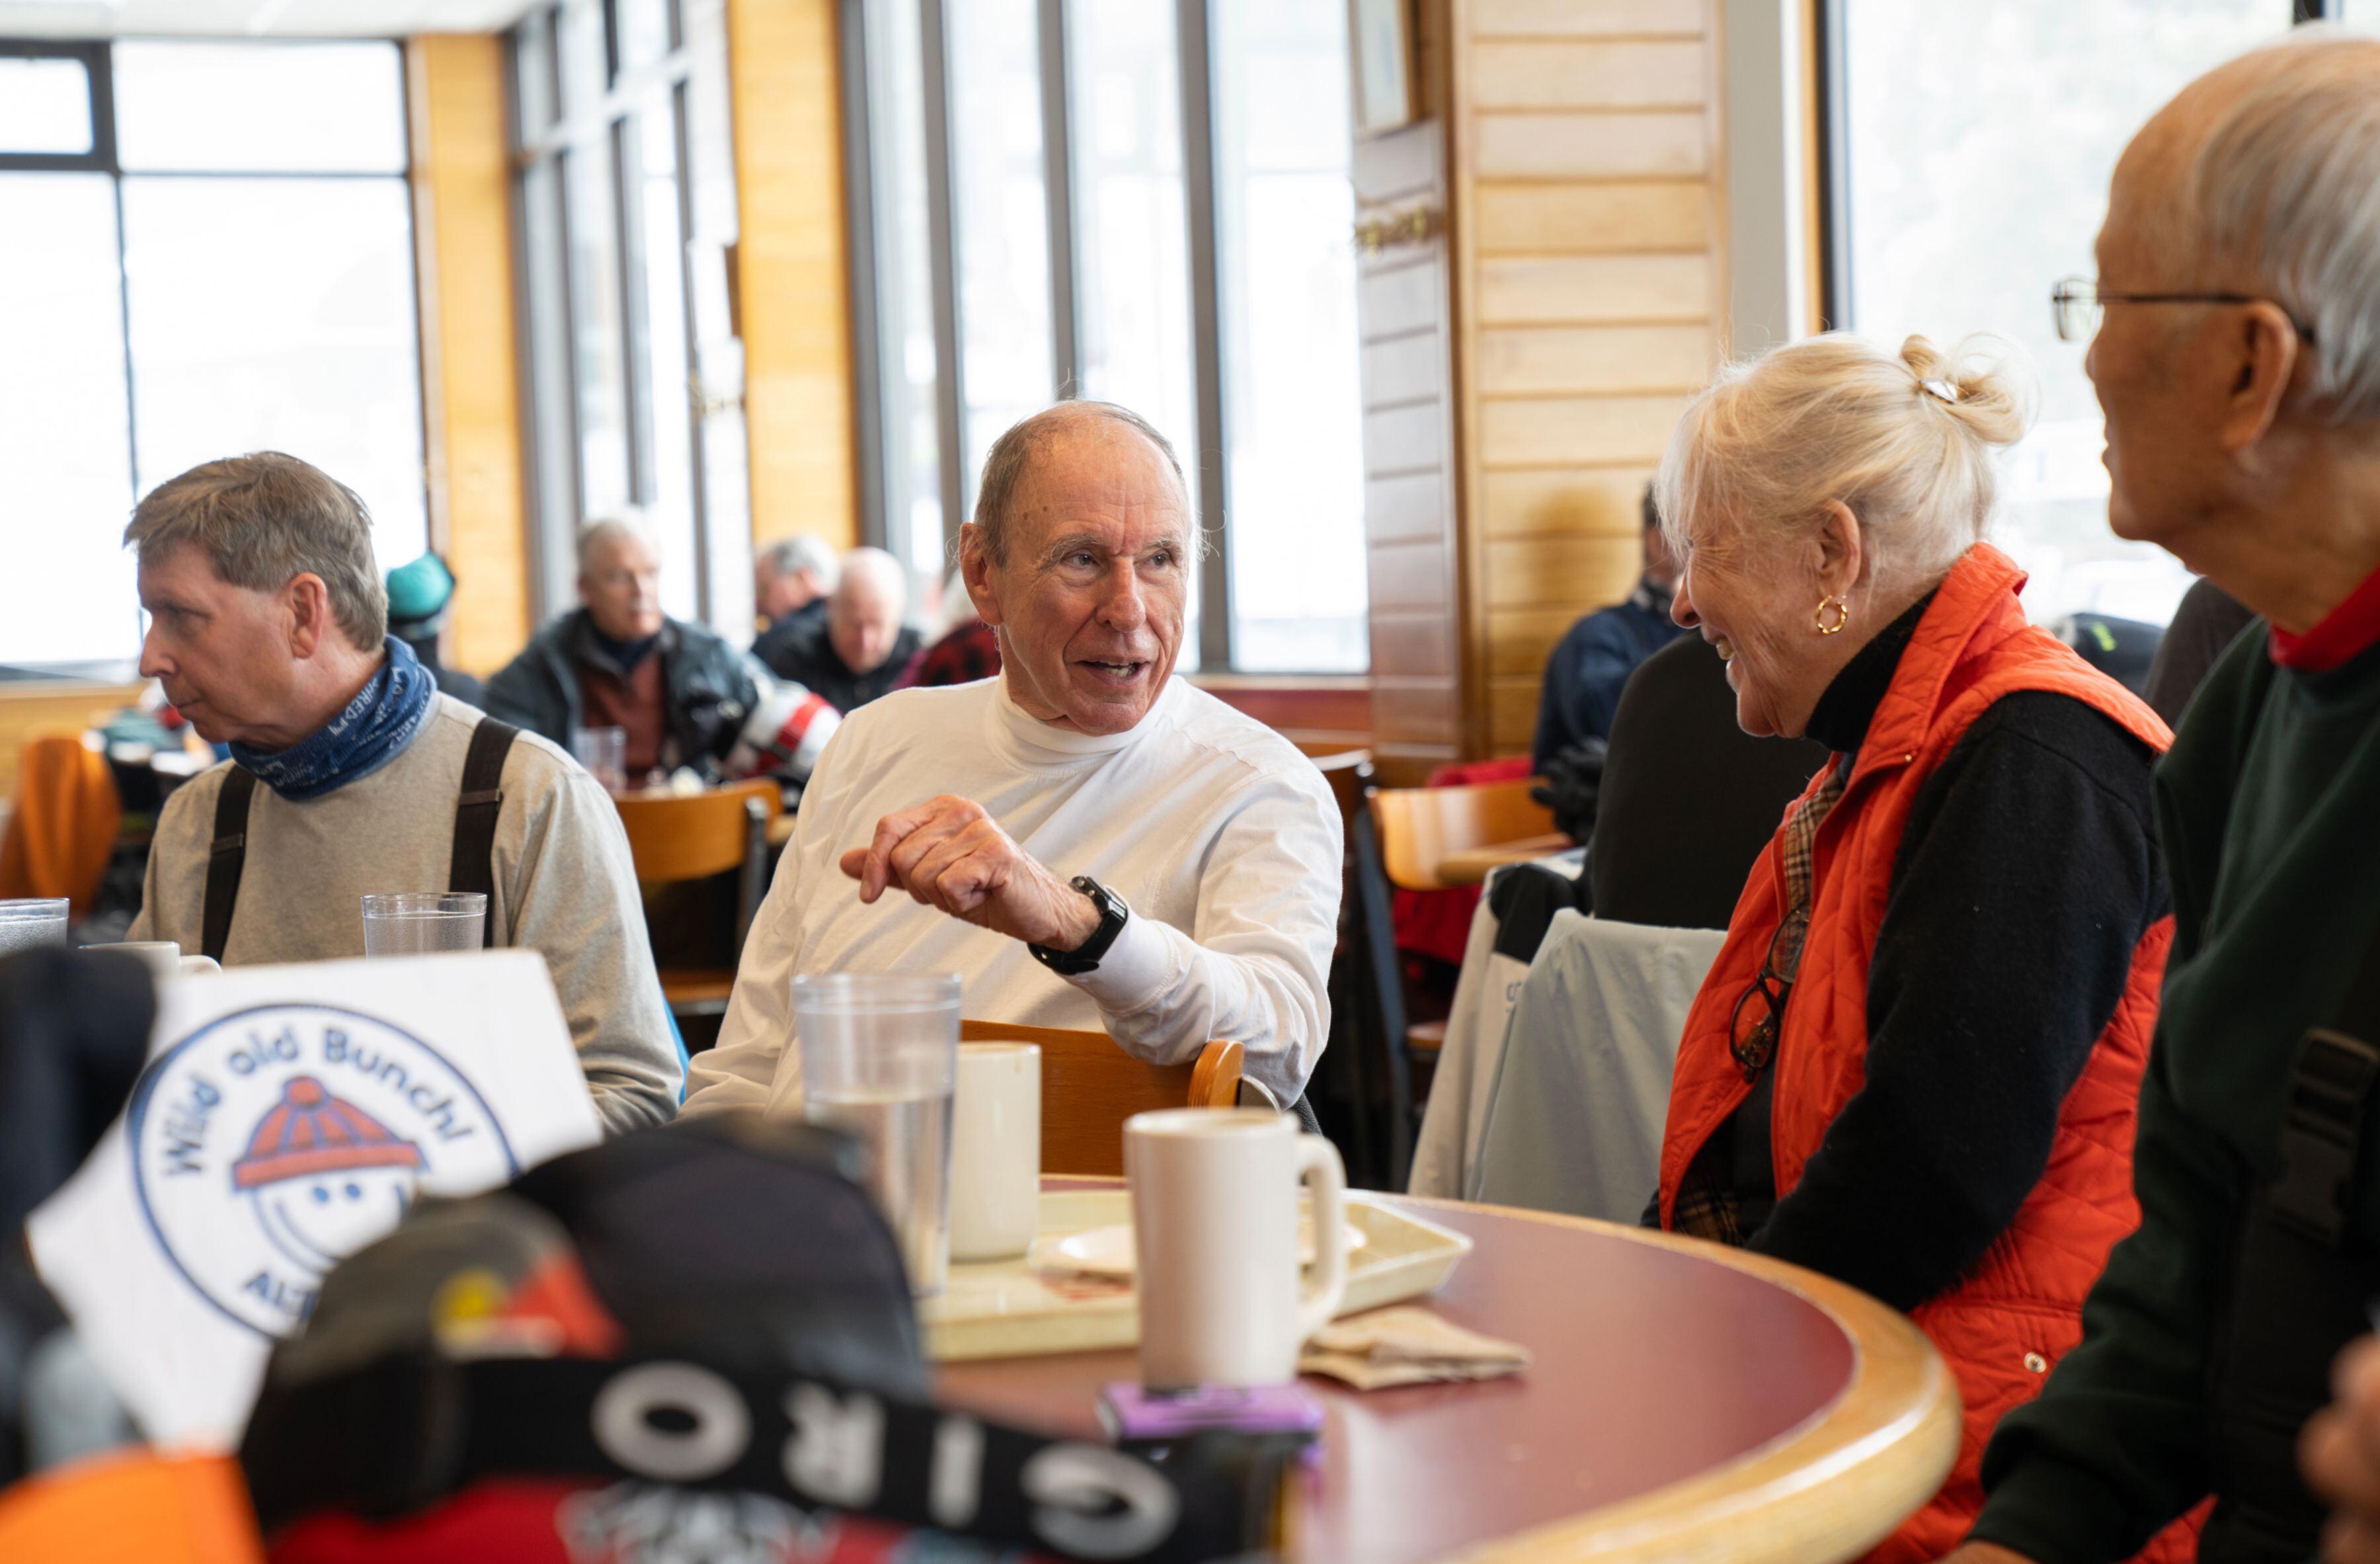 Wild old Bunch members, from left: Leo Exley, Bob Phiilips, Classie Page and Hugh Paik at Alf’s Restaurant after morning runs at the Alta Ski Area, in Alta, Utah, March 13, 2024. The Wild old Bunch (who meaningfully chose to lowercase “old” in the name), a ski club for seniors that started in 1973 and boasts around 115 members, has 80- and 90-year-olds that still ski. (Kate Russell/The New York Times)